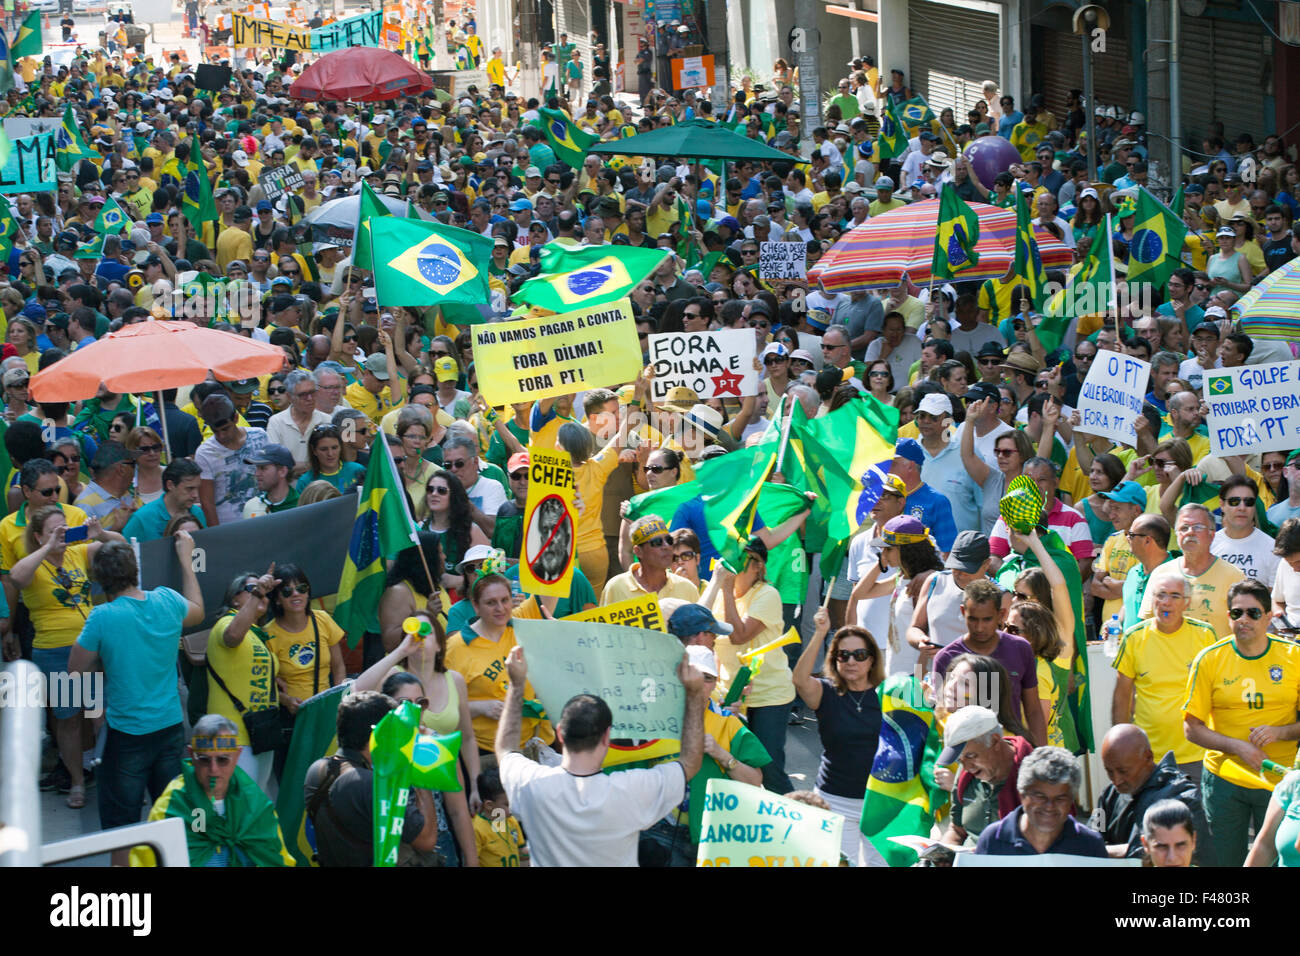 Anti-government protests in Brazil, asking for Dilma Roussef's impeachment over corruption scandals, rising inflation and crisis Stock Photo